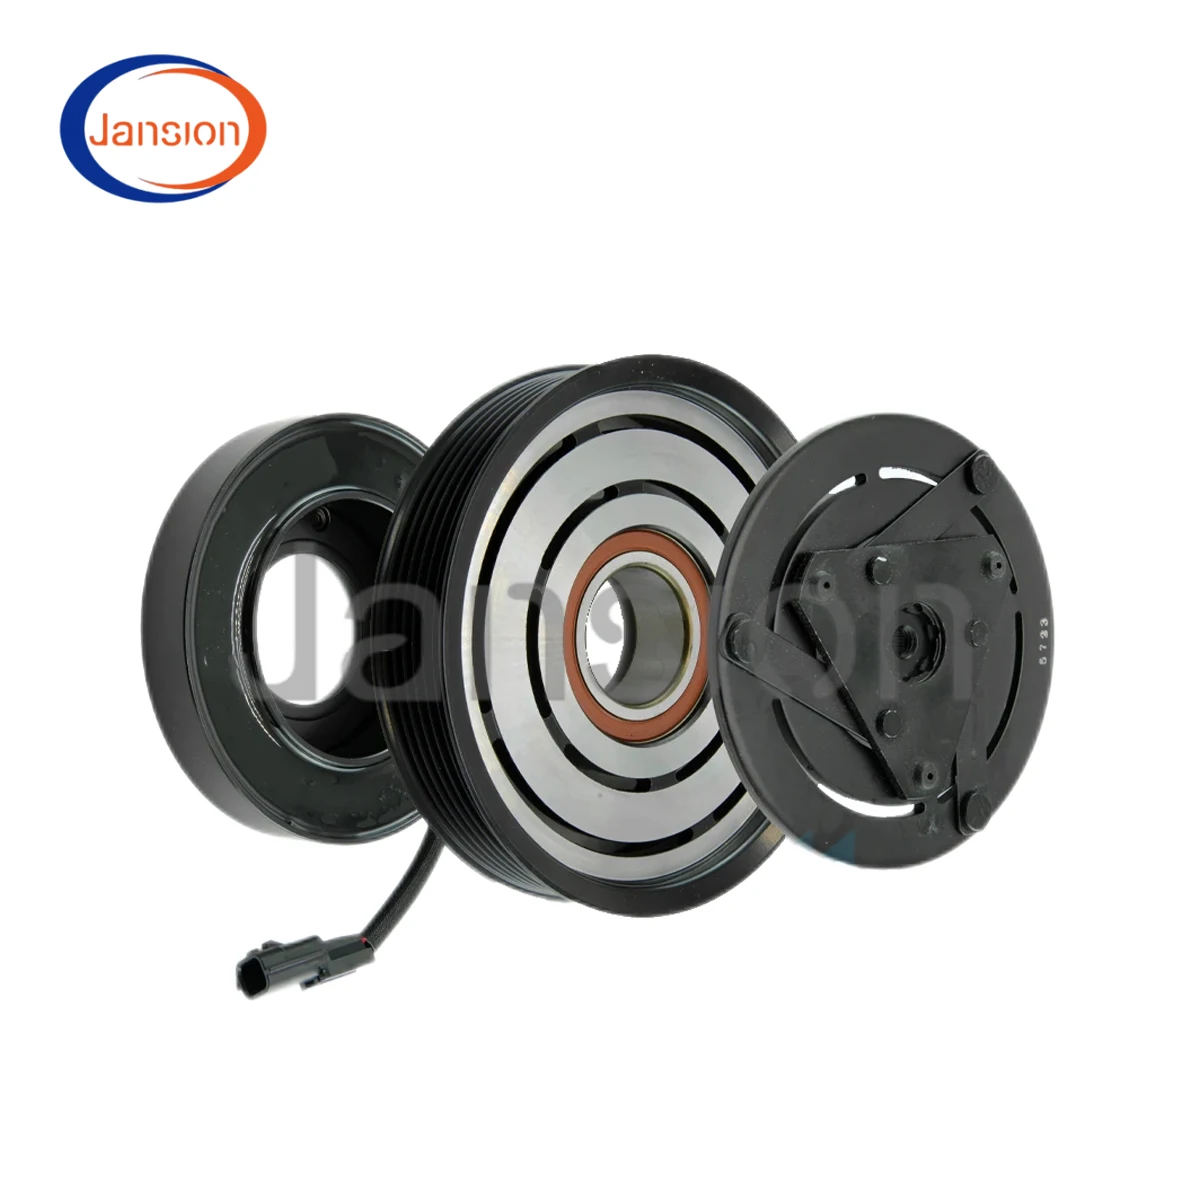 

AC A/C Air Conditioning Compressor Clutch Pulley For ZEXEL/VALEO DKV-11 FOR DACIA LOGAN SANDERO DUSTER DOKKER 1.5 DCI 926009154R